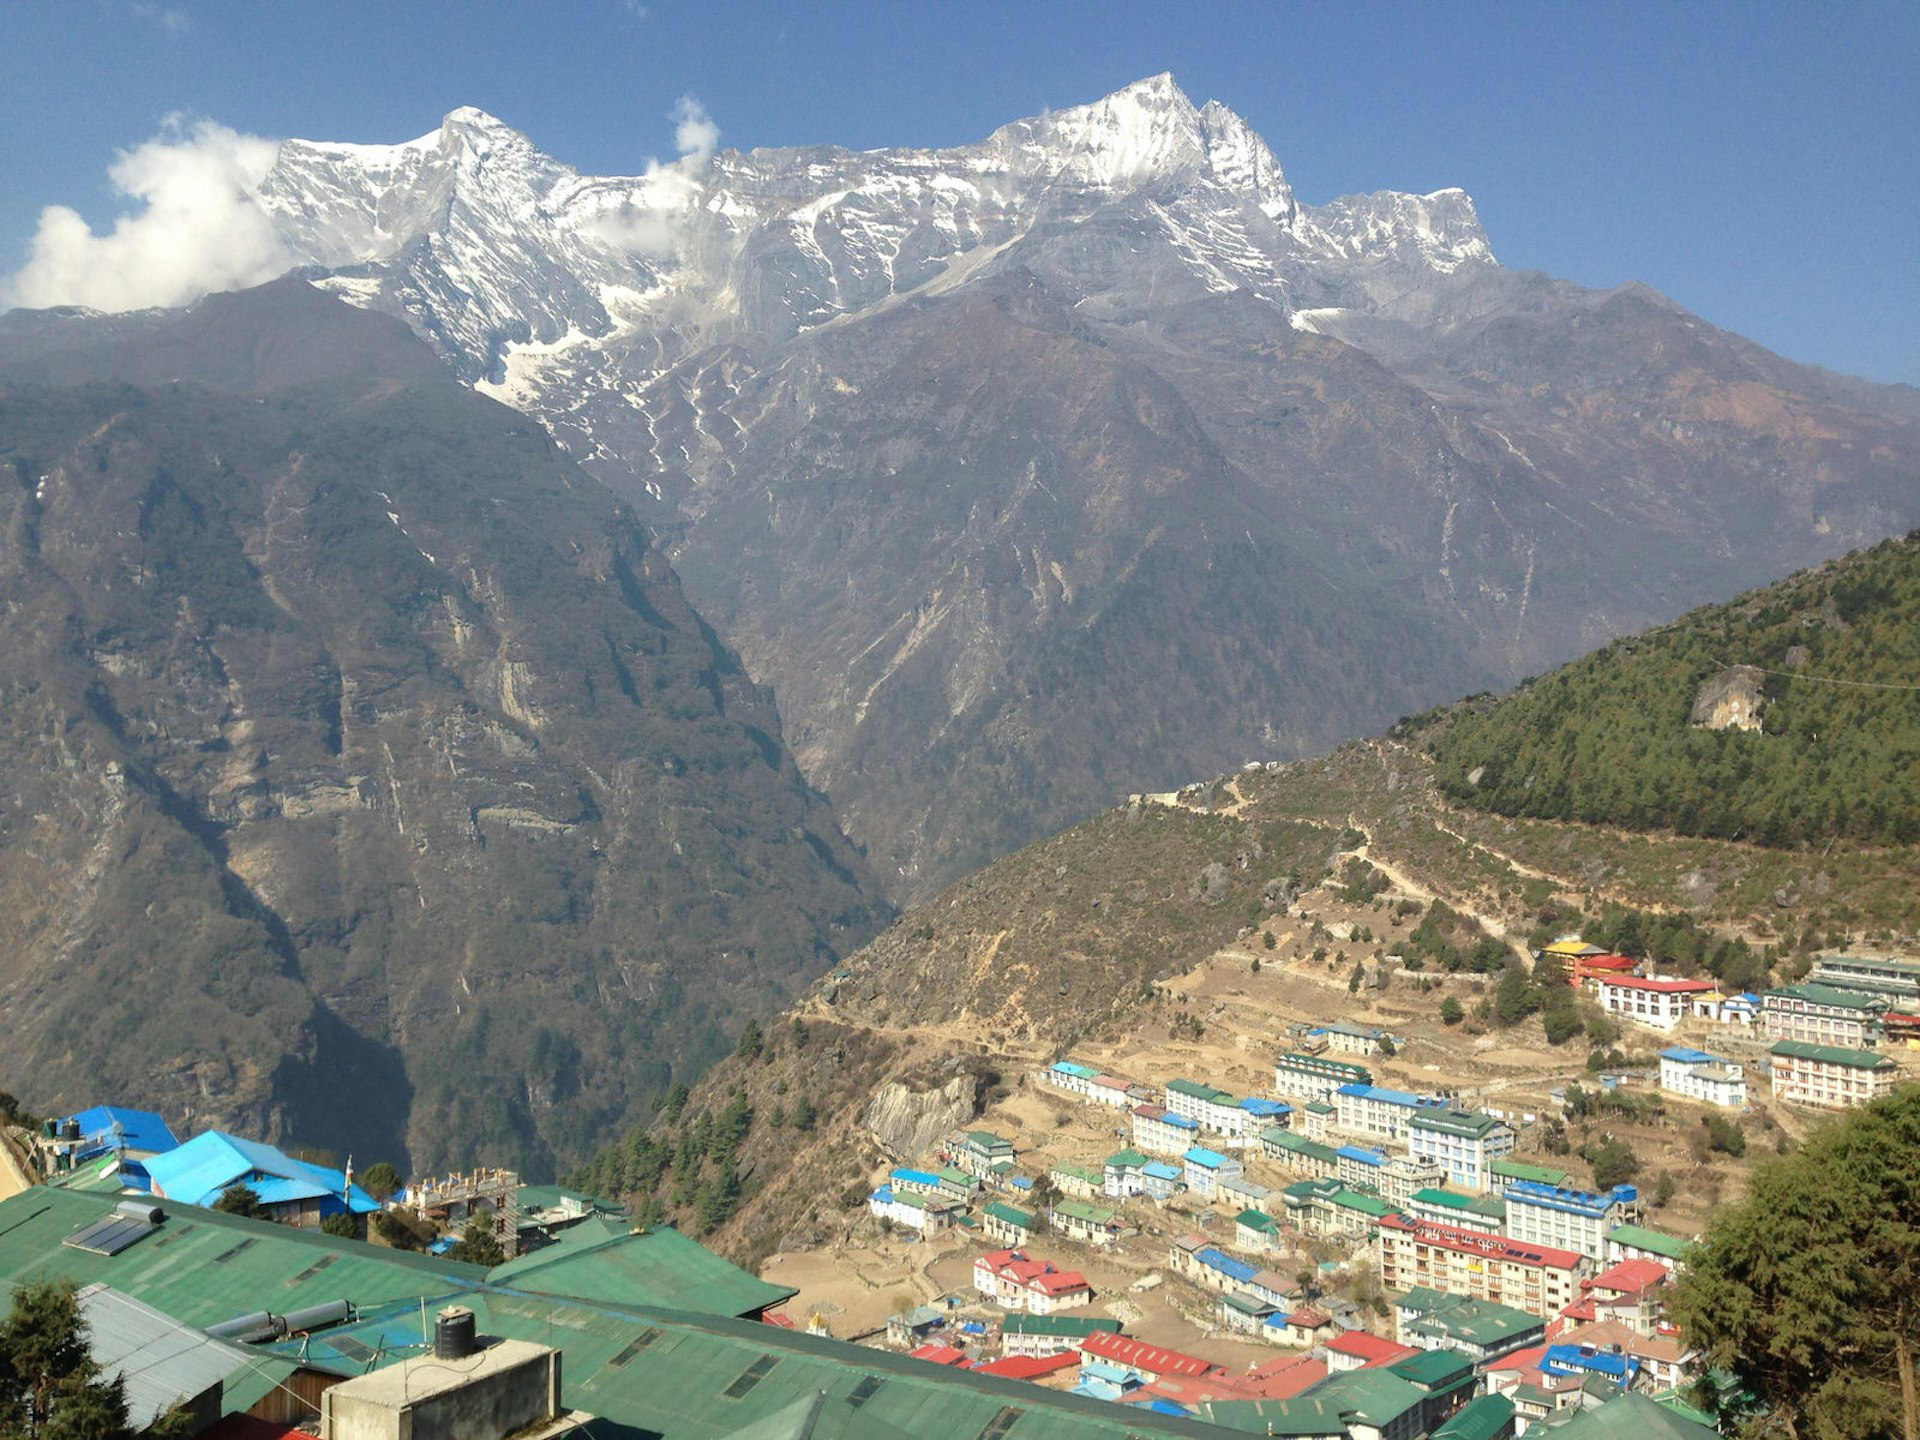 Snowpeaks rising over the rooftops of Namche Bazaar © Anna Kaminski / Lonely Planet